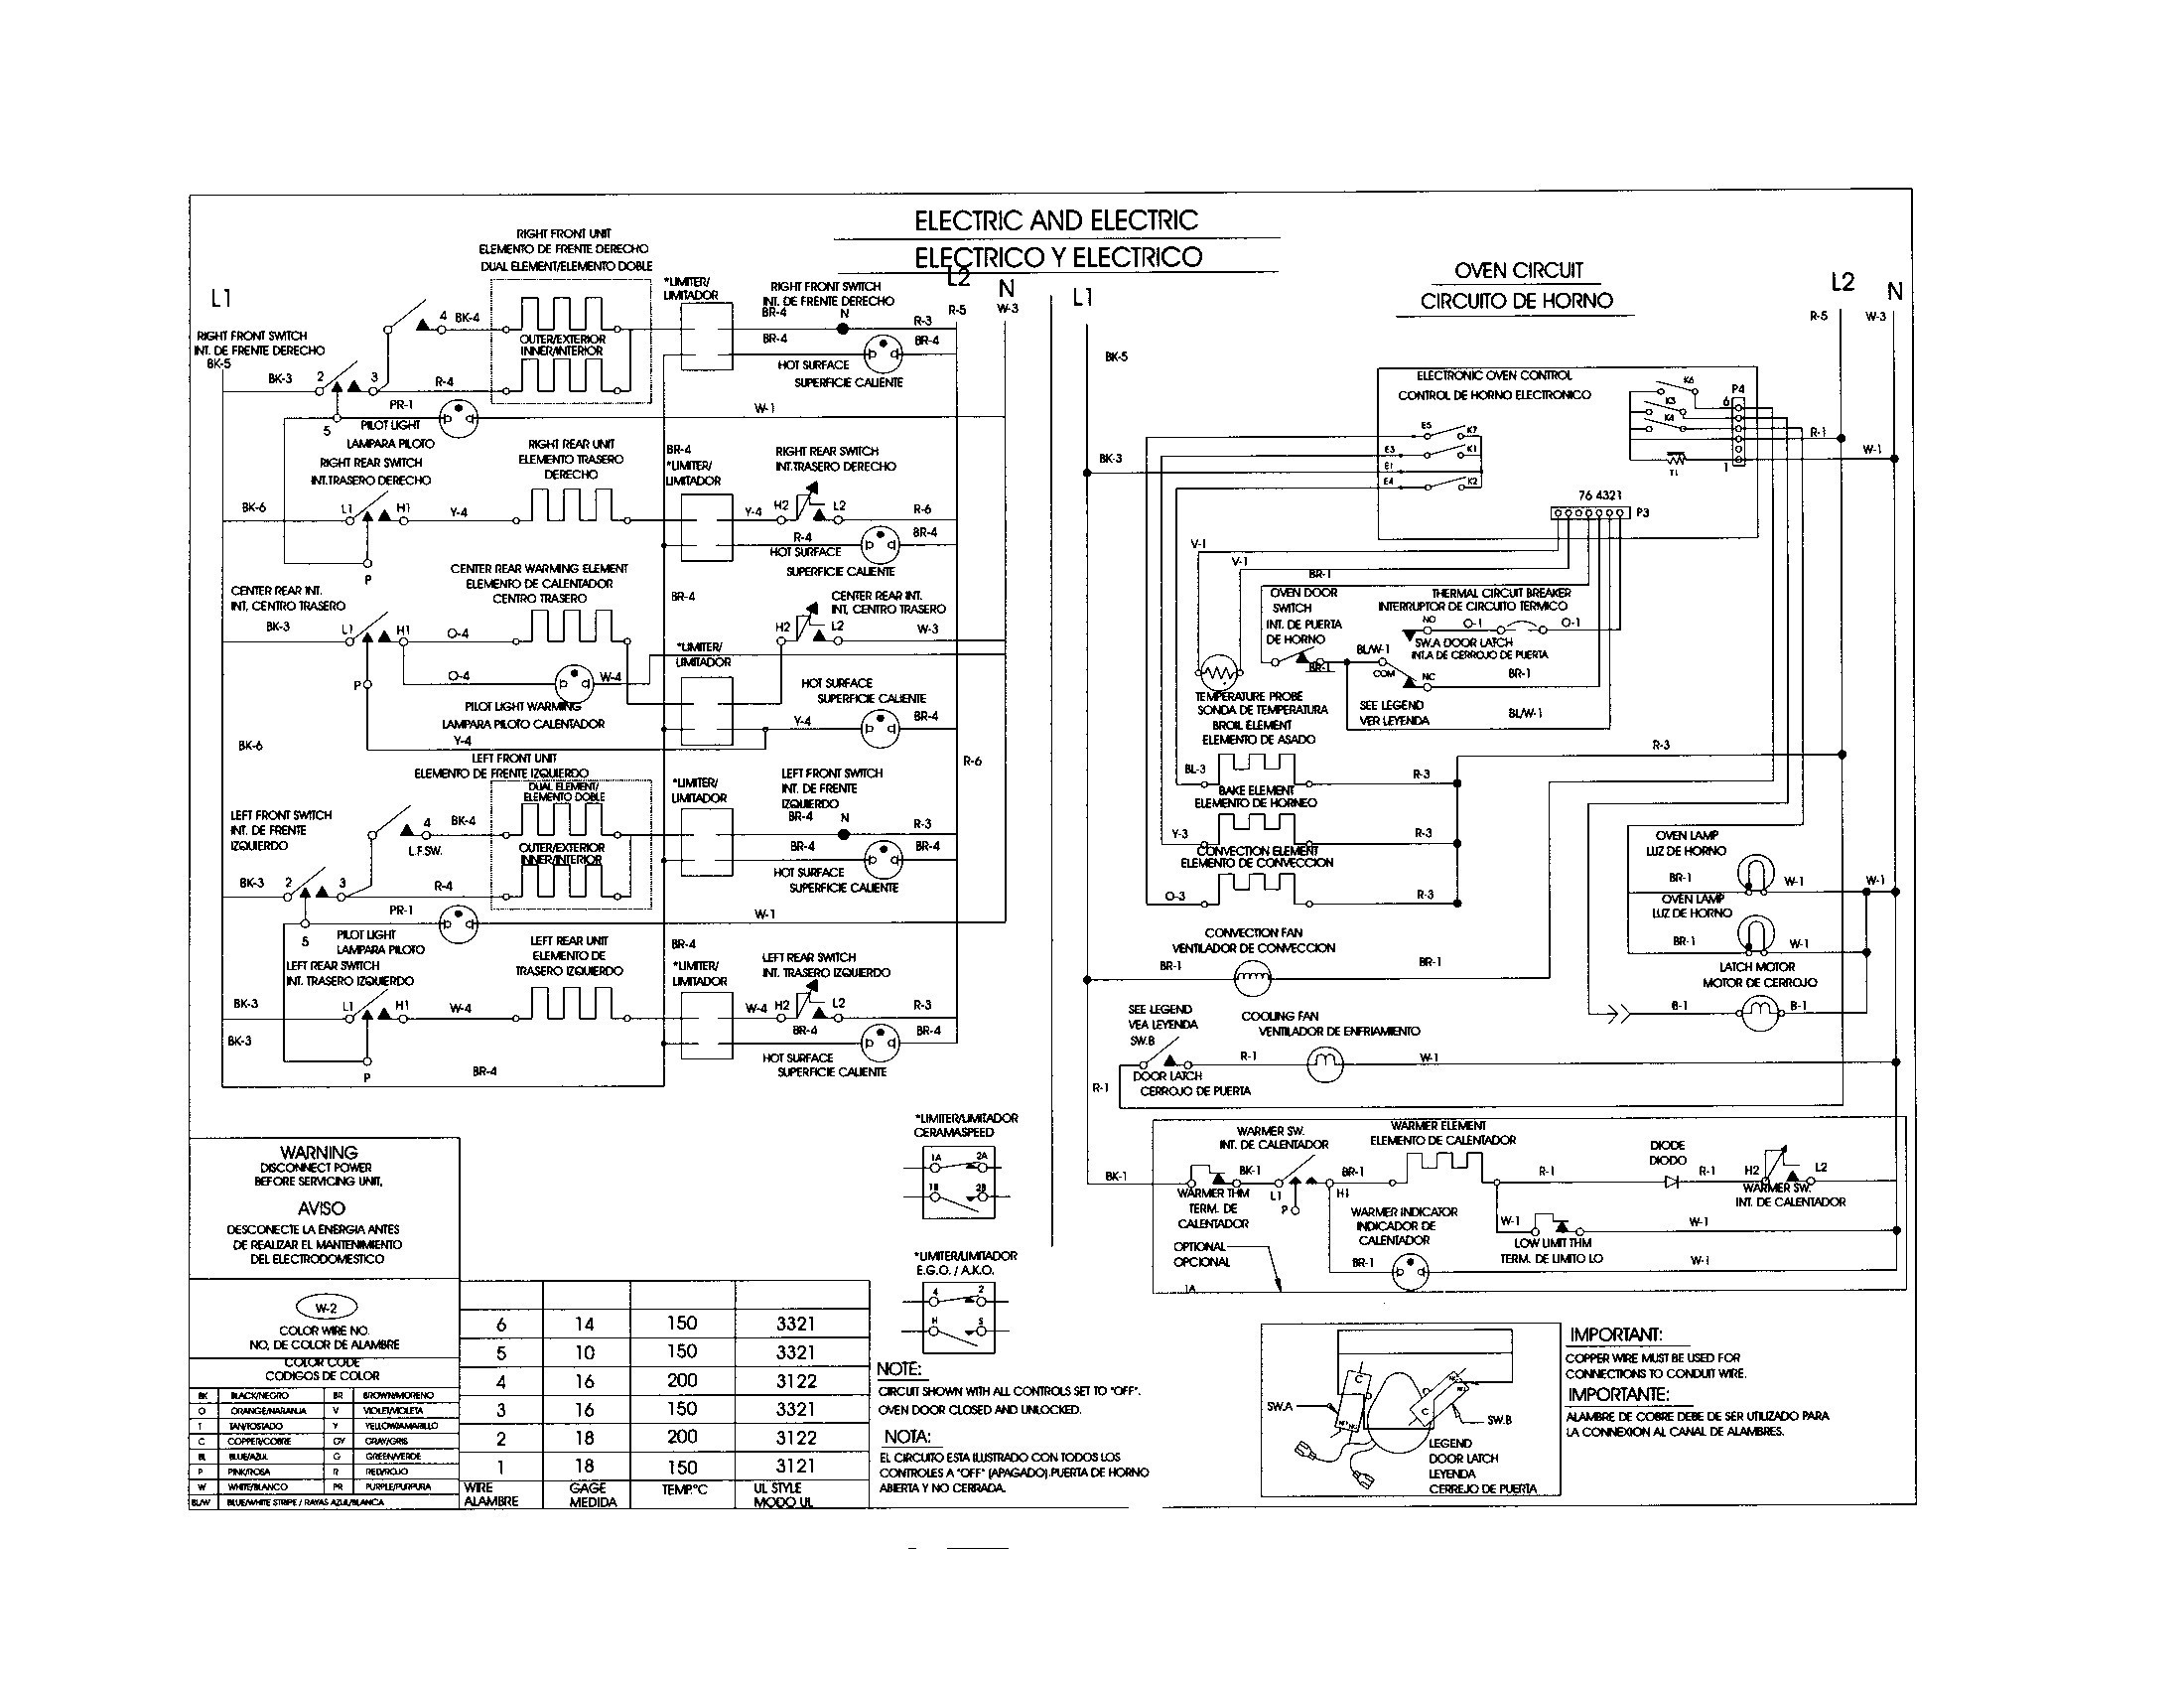 Wiring Diagram For Kenmore Dryer New Wiring Diagram Kenmore Dryer Reference Kenmore Dryer Power Cord